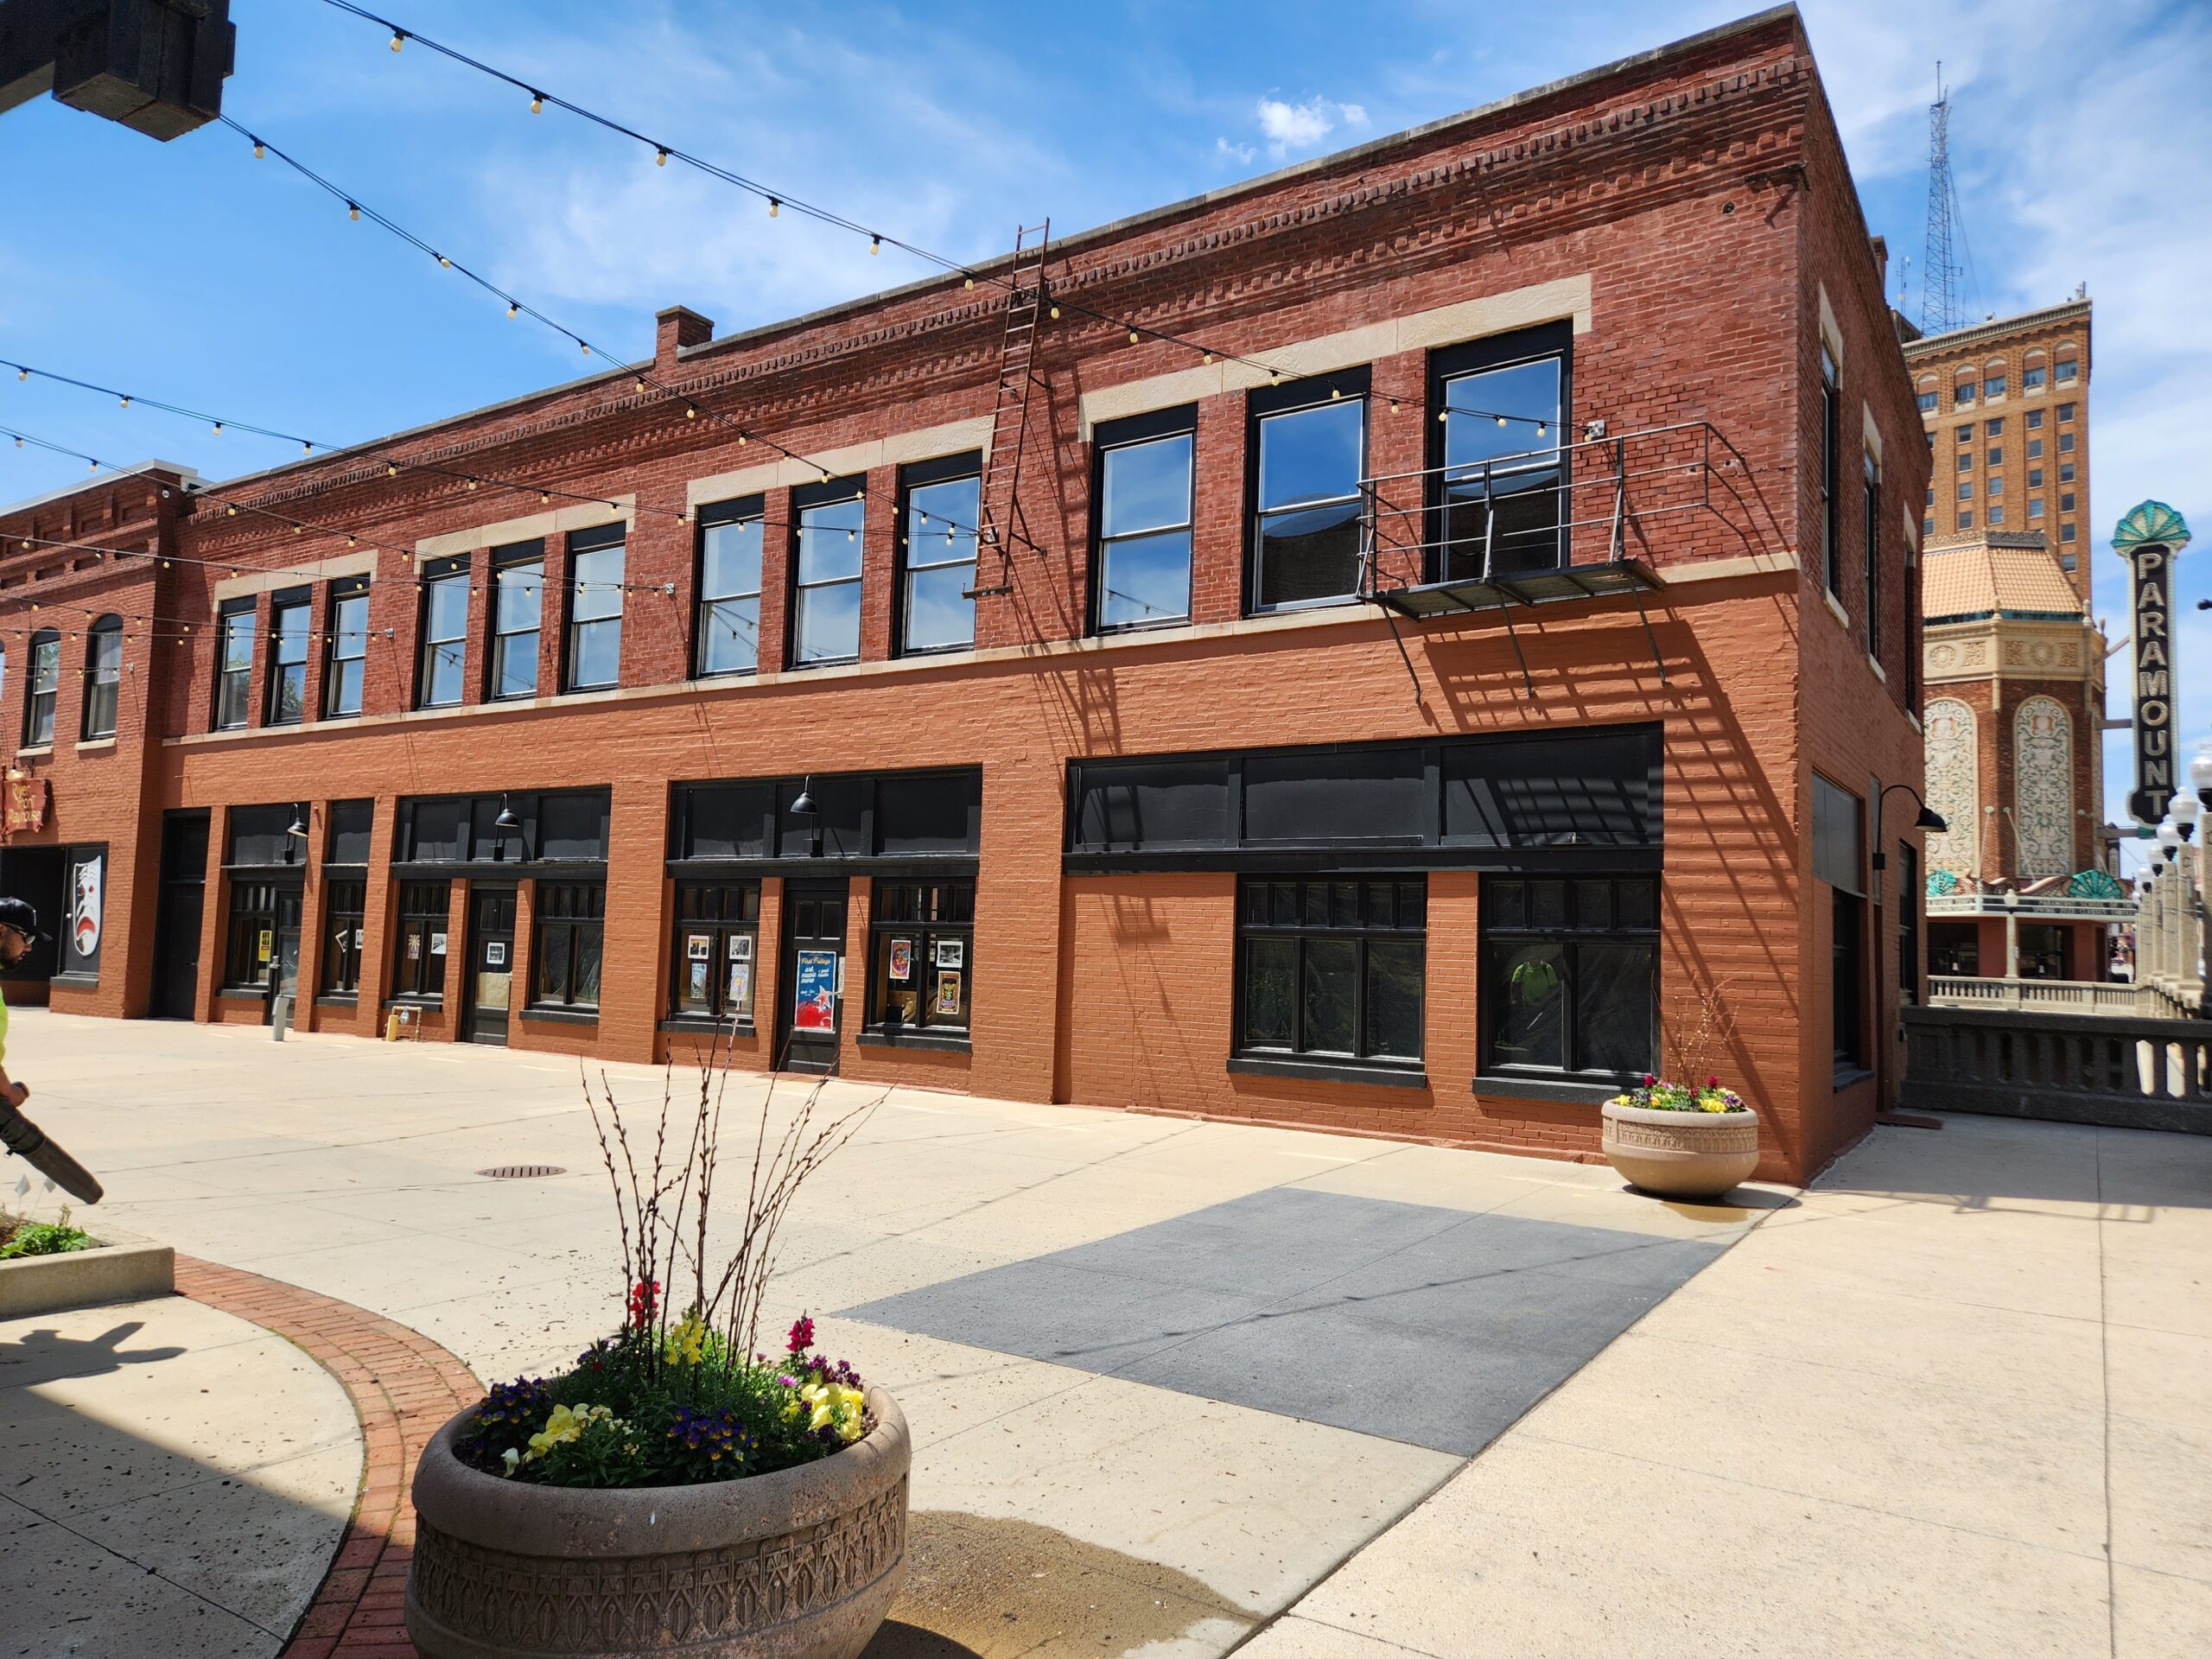 43 Galena as a plain brick building on the plaza with bistro lights above.